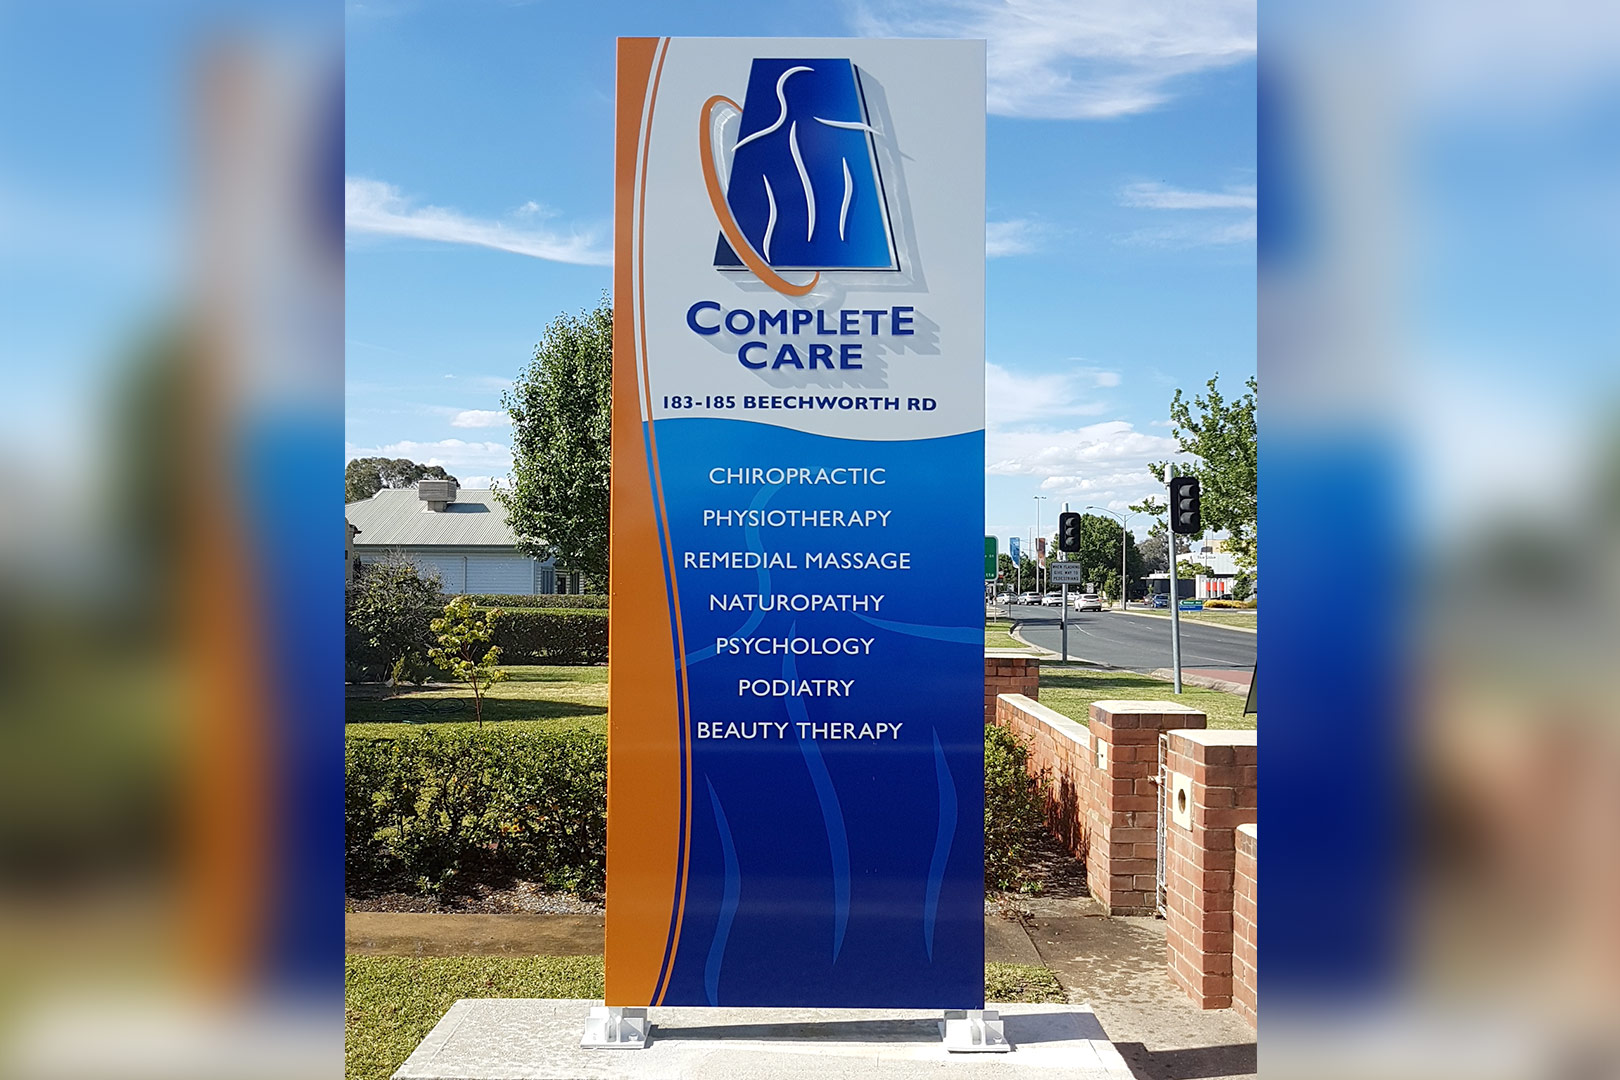  Complete Care Chiropractic 